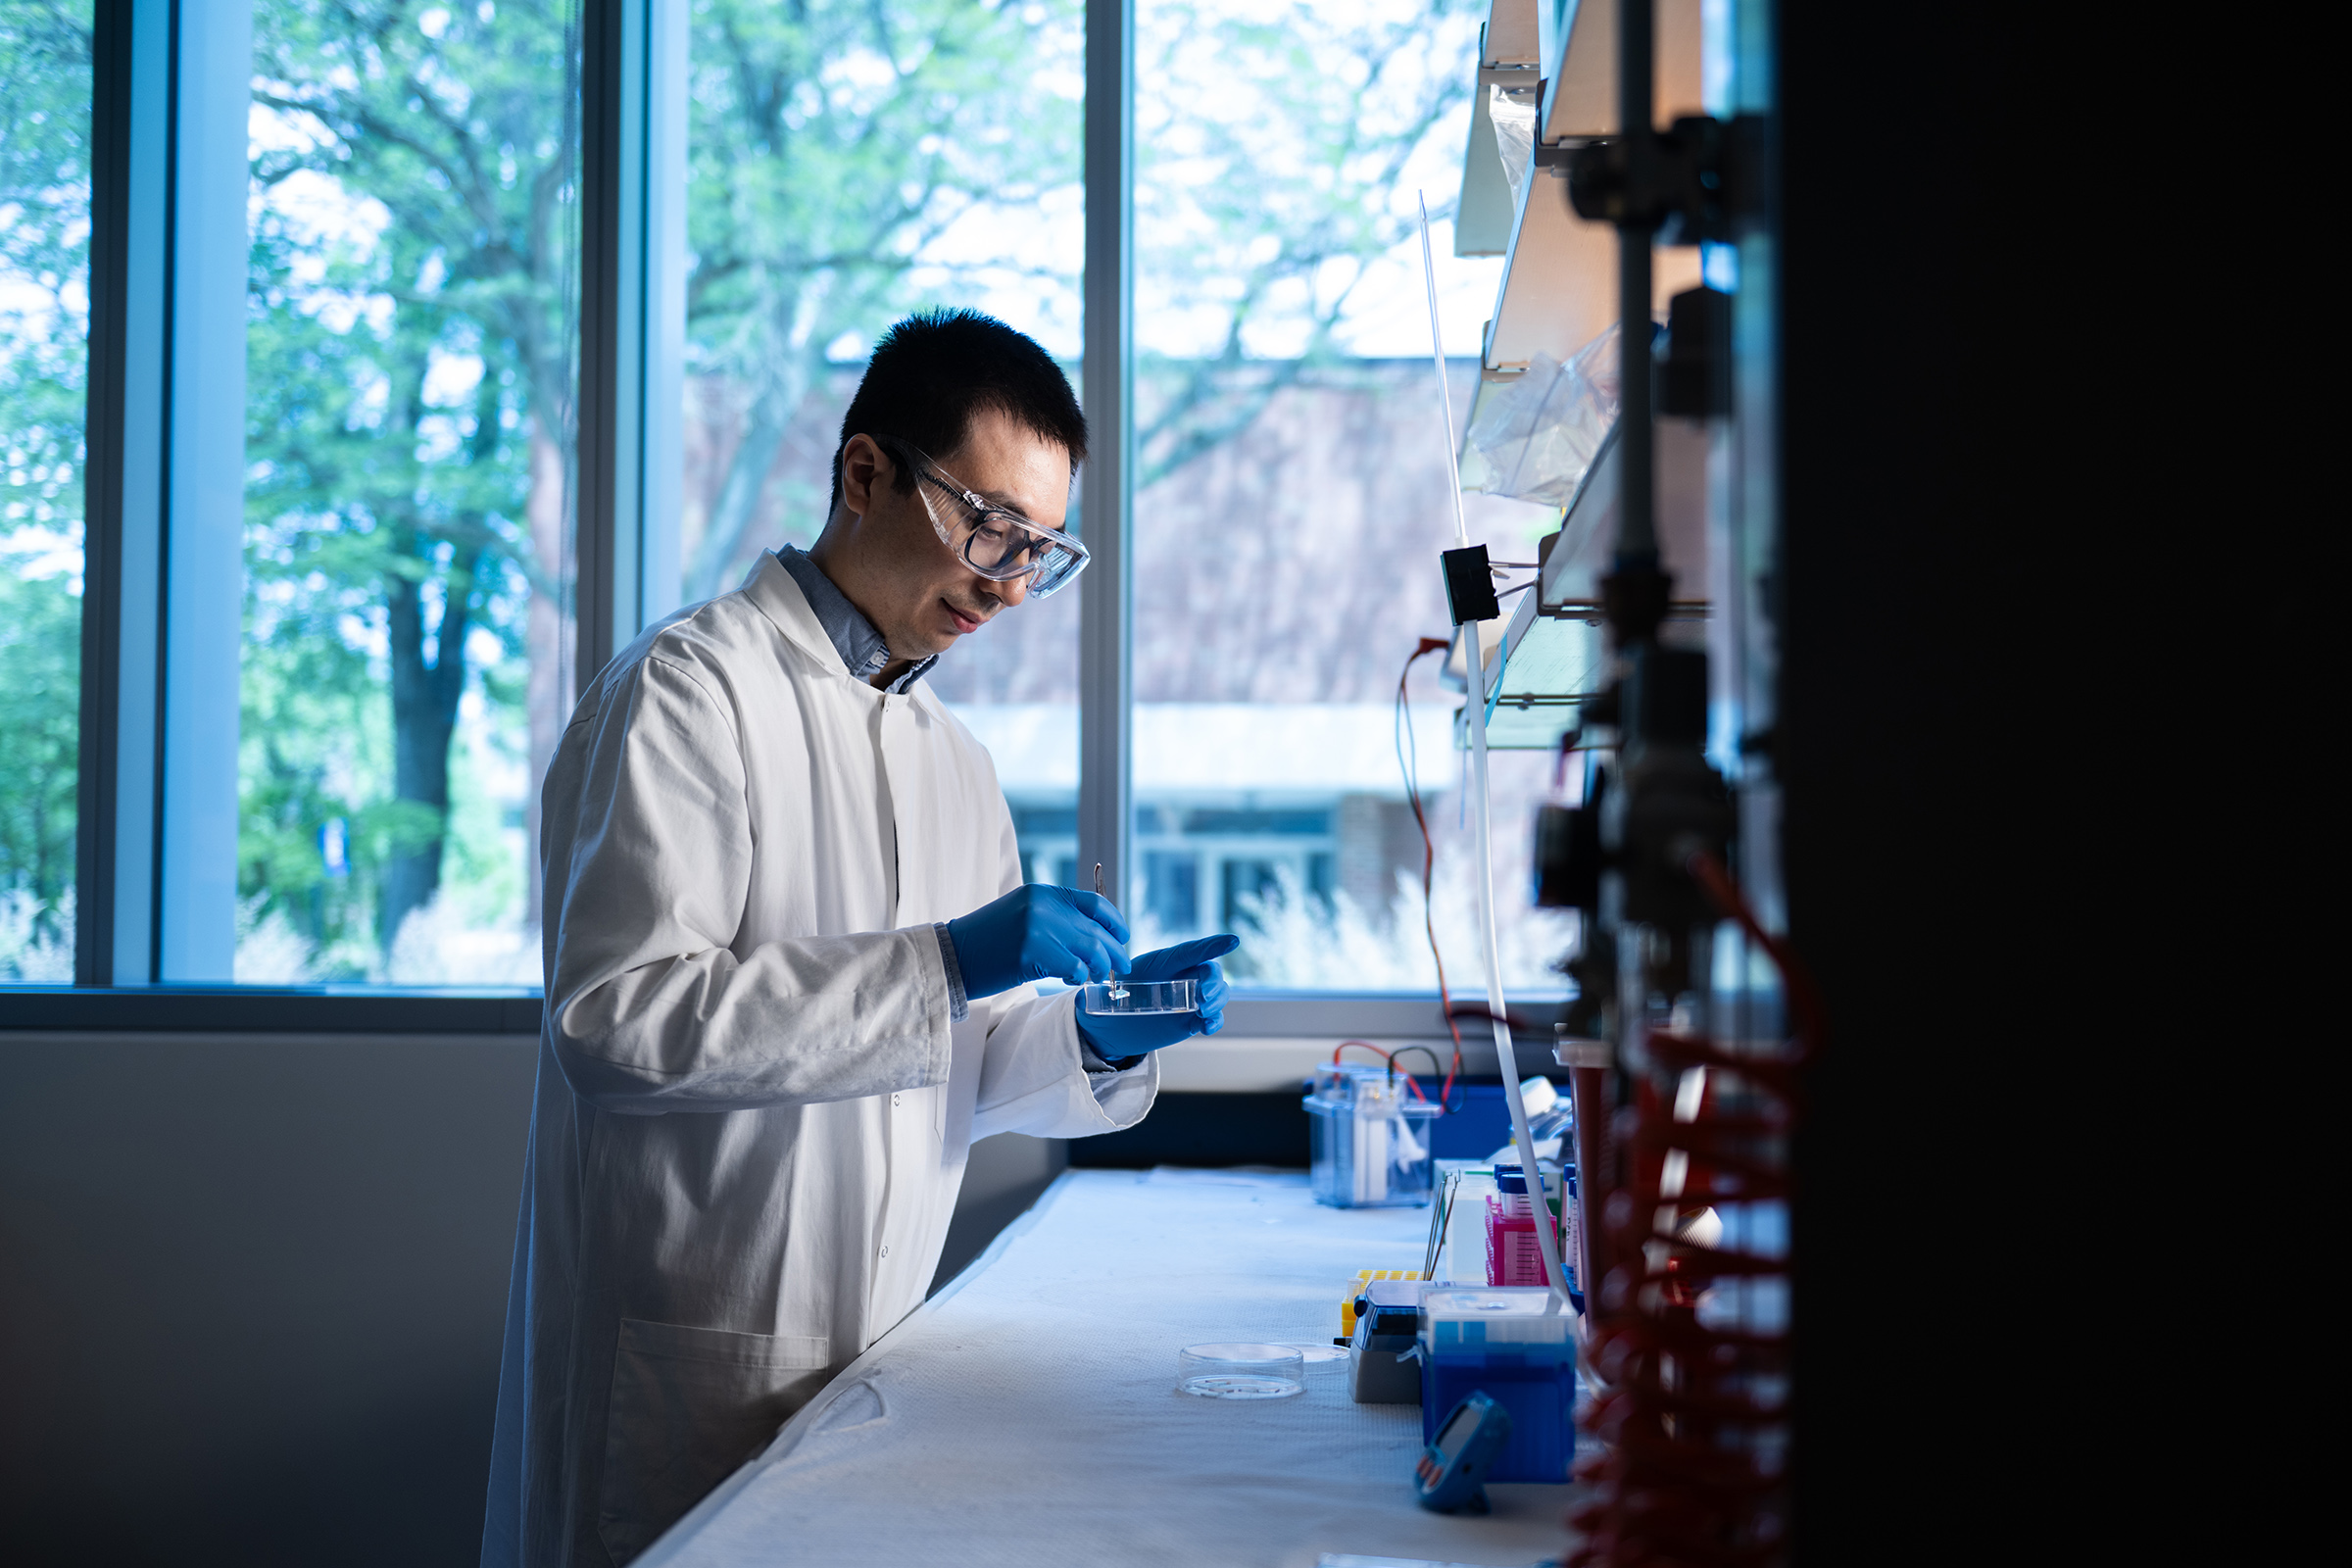 Wearing a white lab coat and protective equipment, Assistant Professor Jie Fan works in his cancer research lab